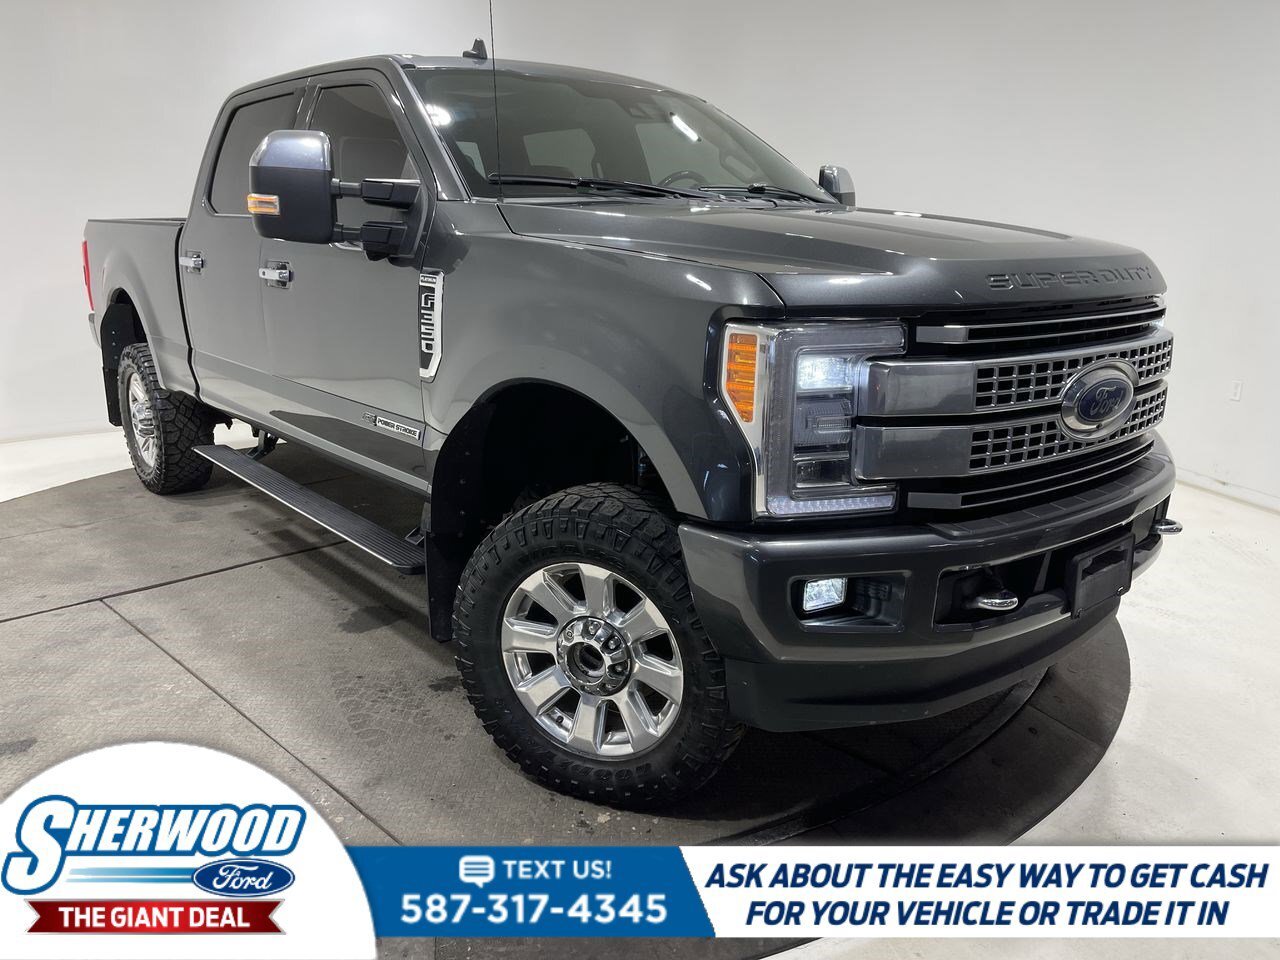 2019 Ford F-350 Platinum- $0 Down $274 Weekly